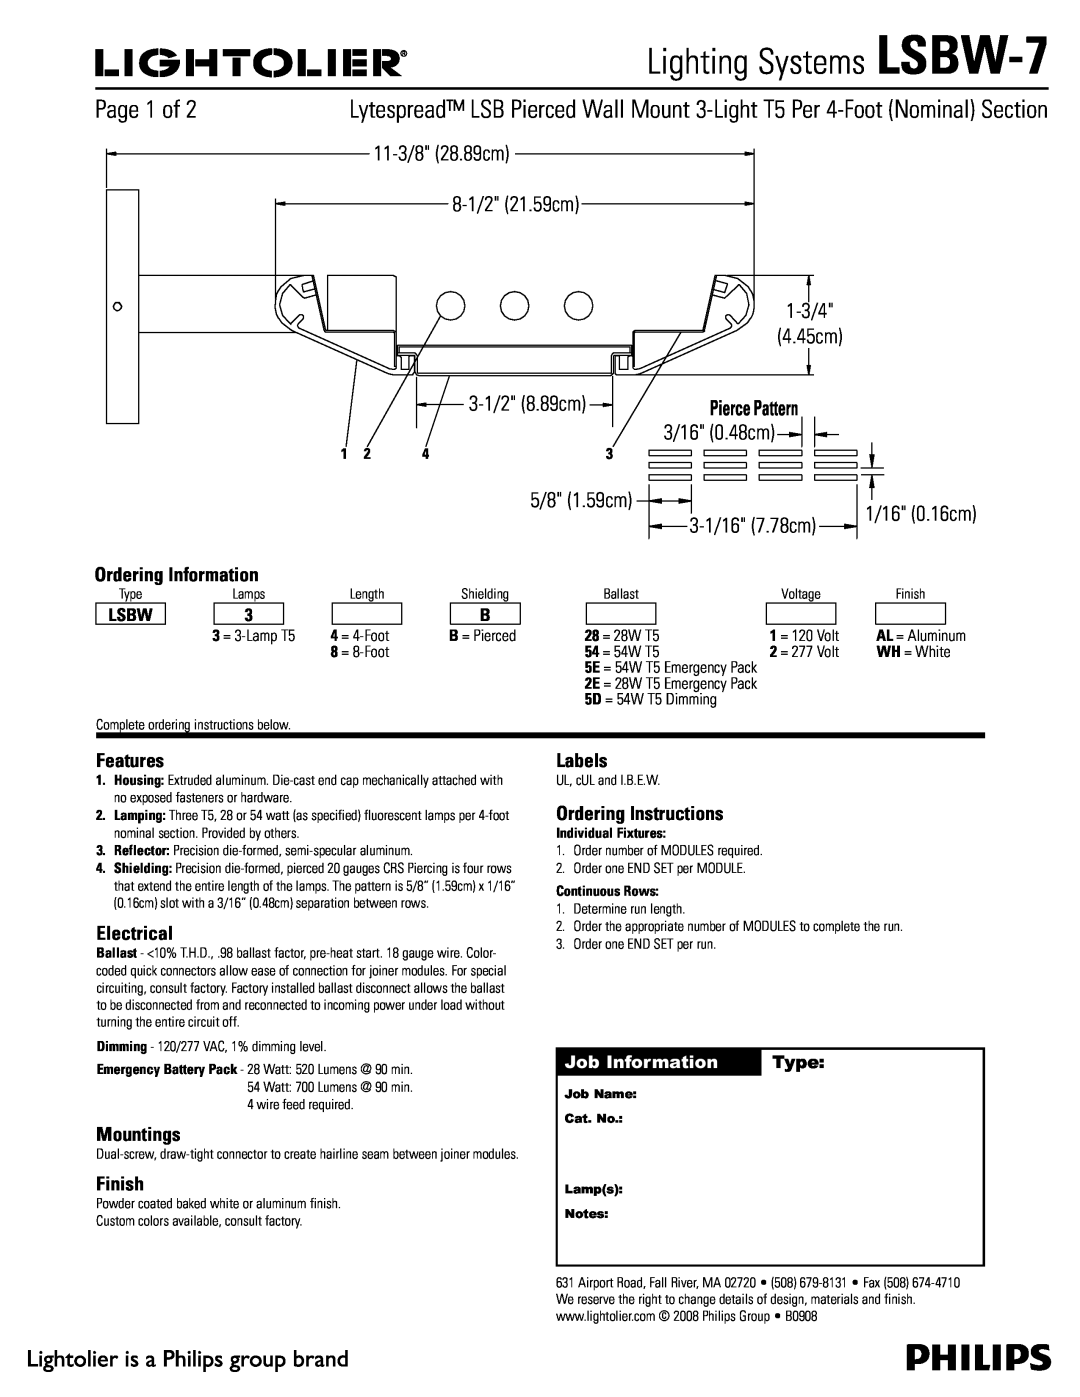 Lightolier LSBW-7 manual Features, Electrical, Mountings, Finish, Labels, Ordering Instructions, Job Information, Type 